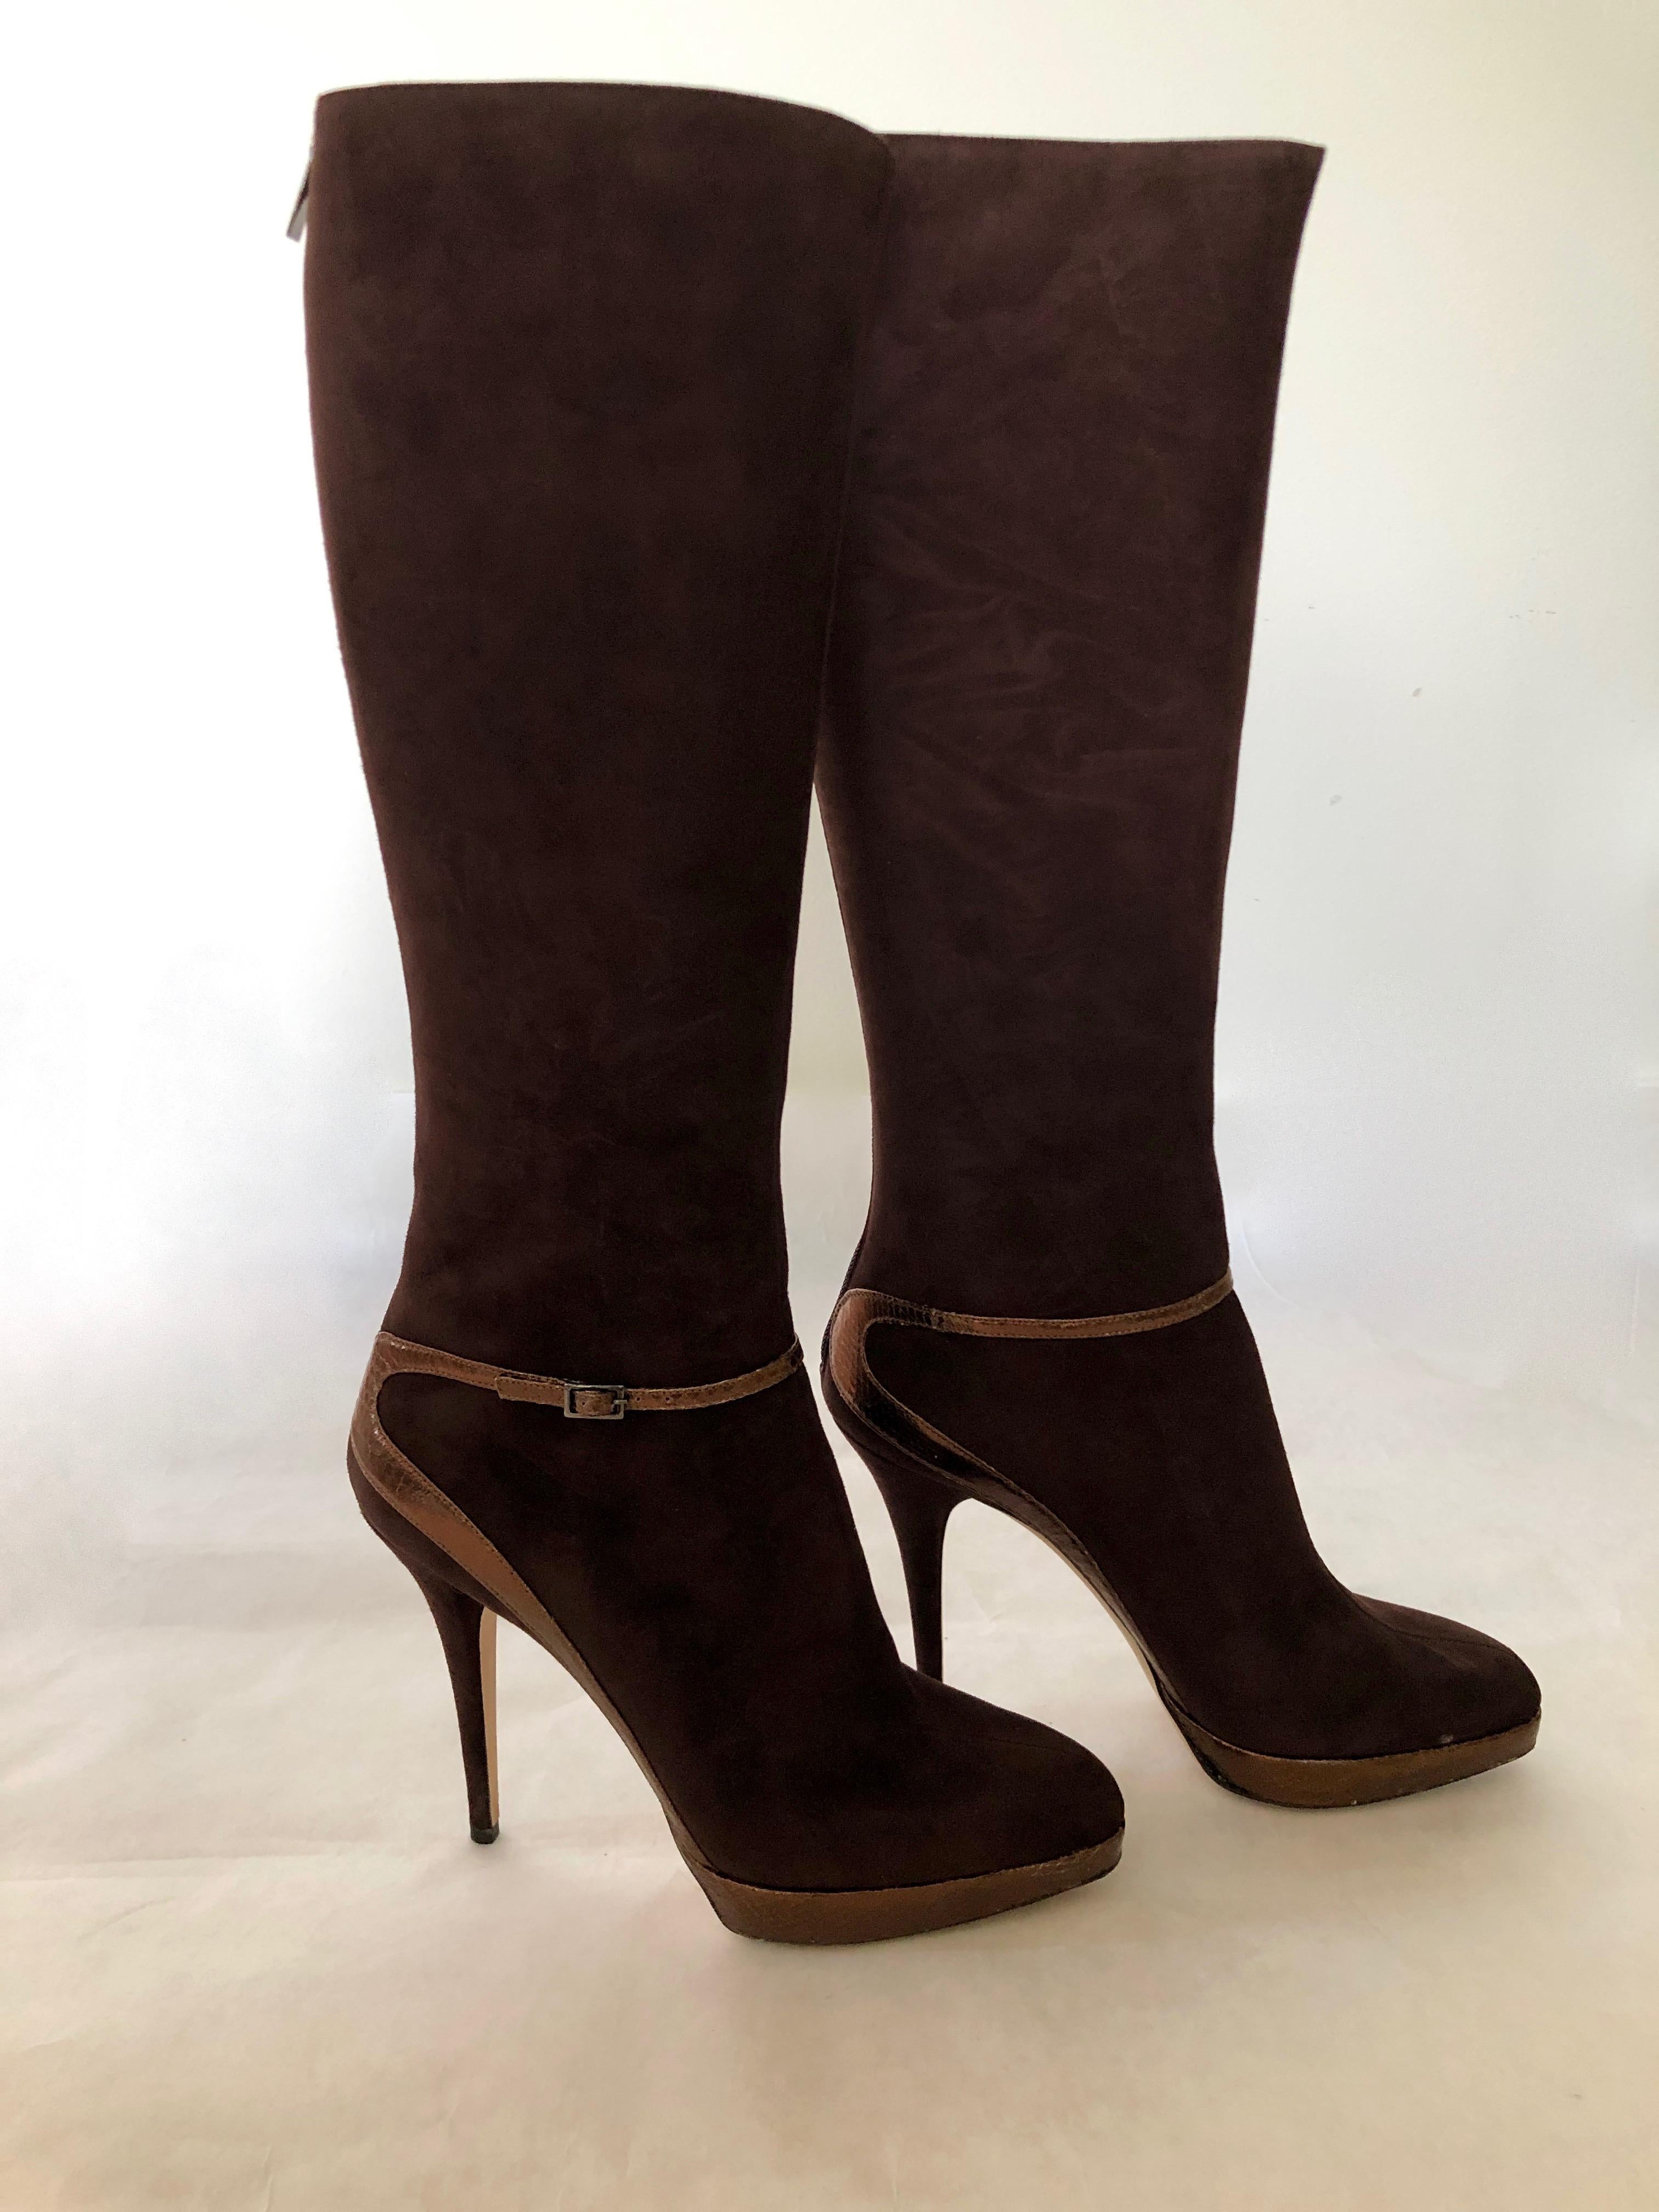 chocolate brown suede boots